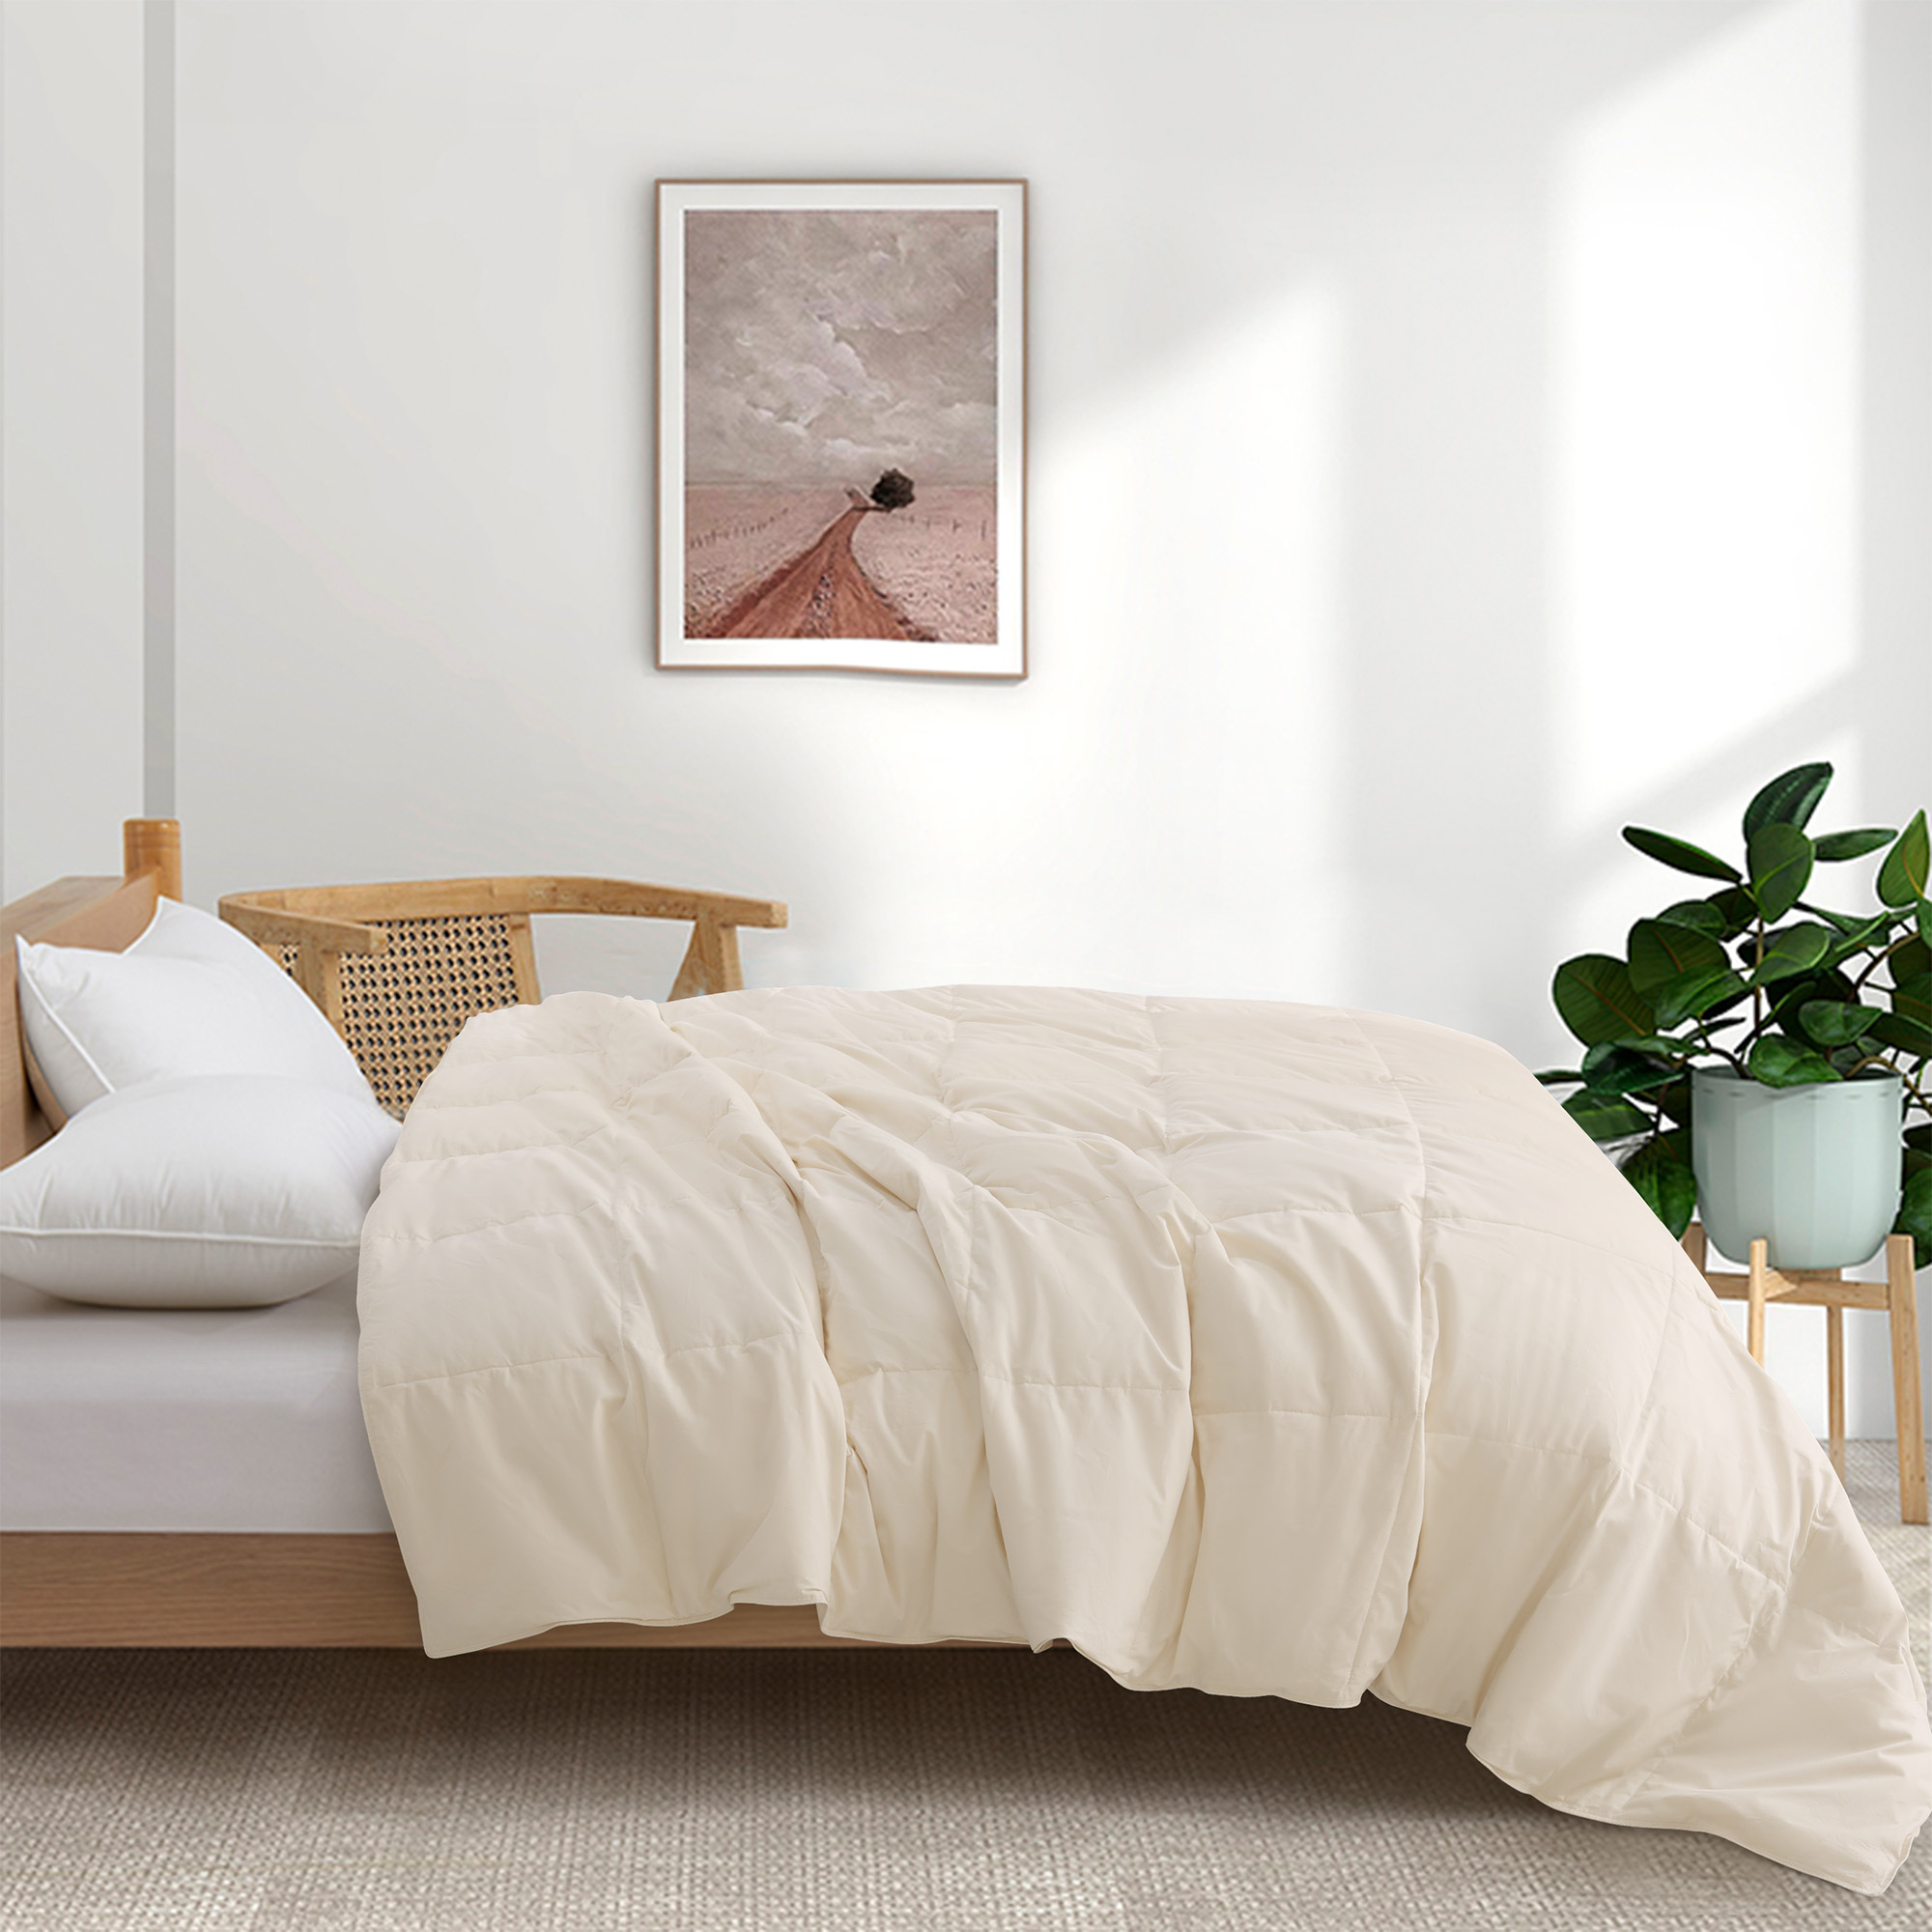 Premium Lightweight Organic Cotton Comforter With Down And Feather Fiber Fill - Perfect For Summer - Twin